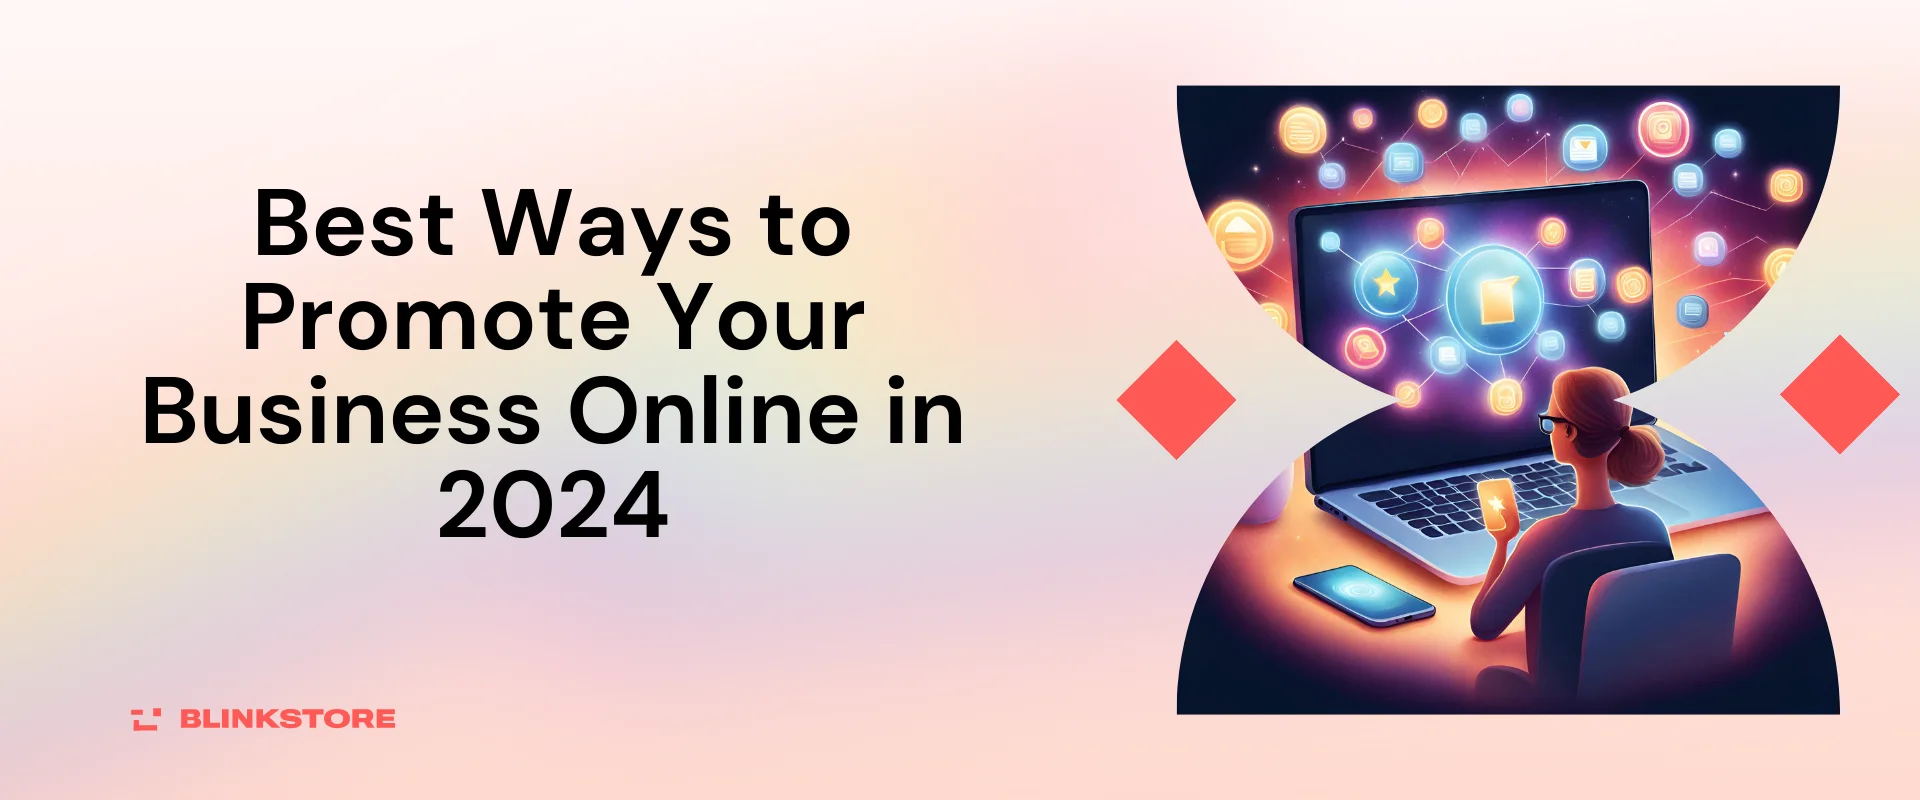 Best Ways to Promote Your Business Online in 2024